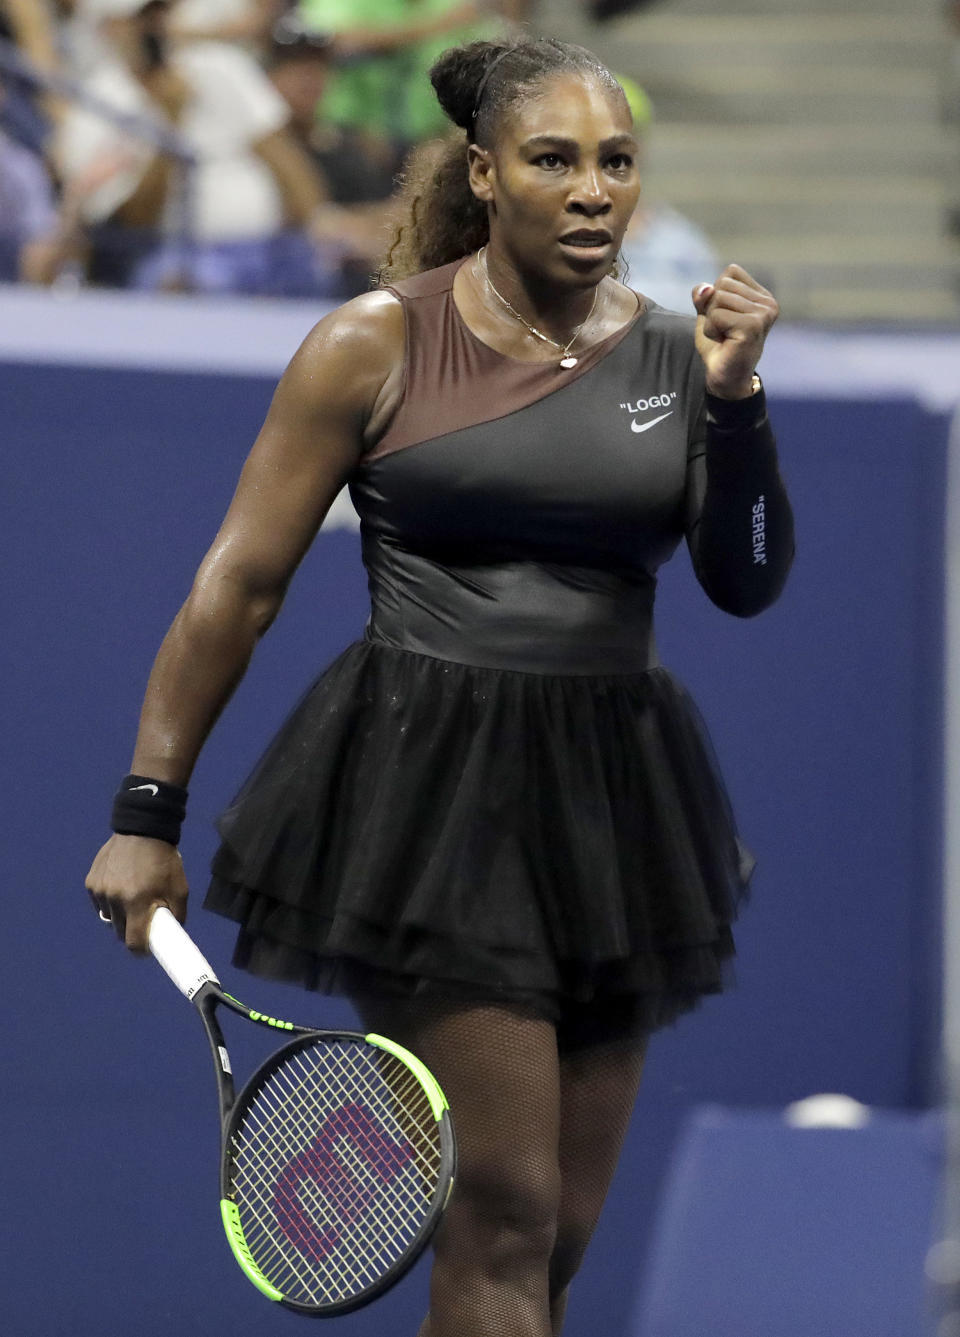 Serena Williams reacts after a point against Magda Linette, of Poland, during the first round of the U.S. Open tennis tournament, Monday, Aug. 27, 2018, in New York. (AP Photo/Julio Cortez)